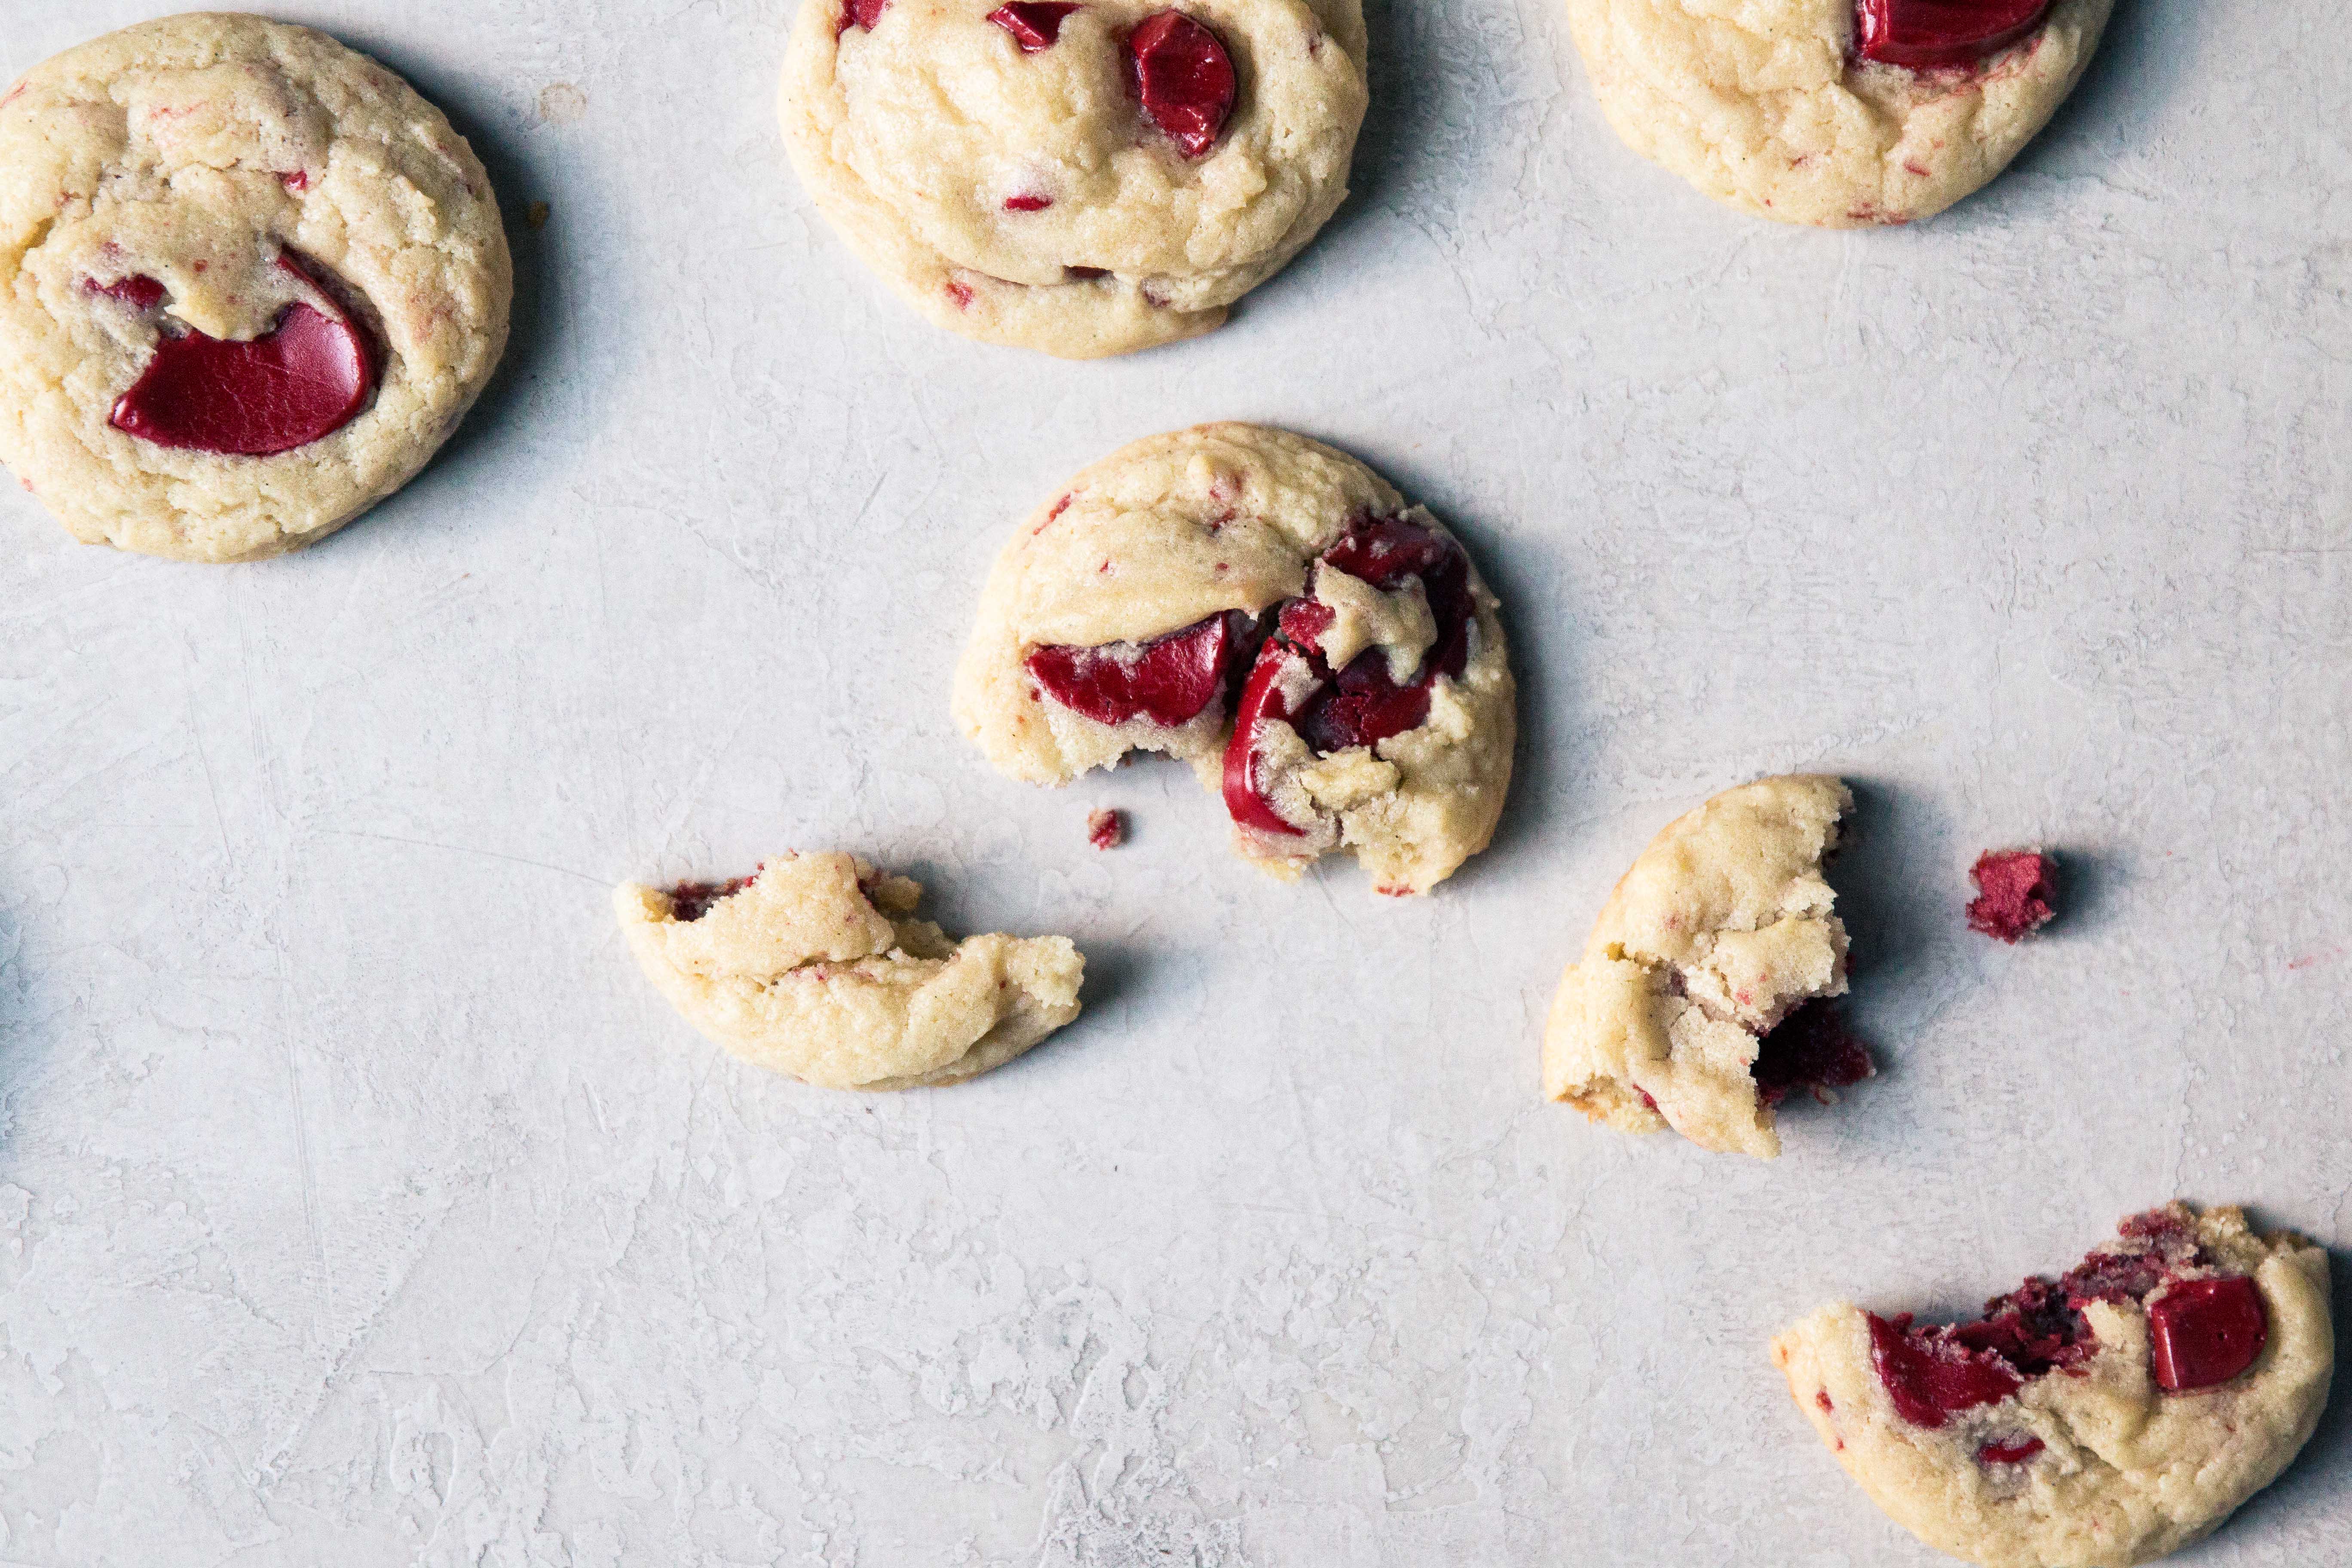 Strawberries and Cream Cookies | Recipe from Danielle Oron on I Will Not Eat Oysters